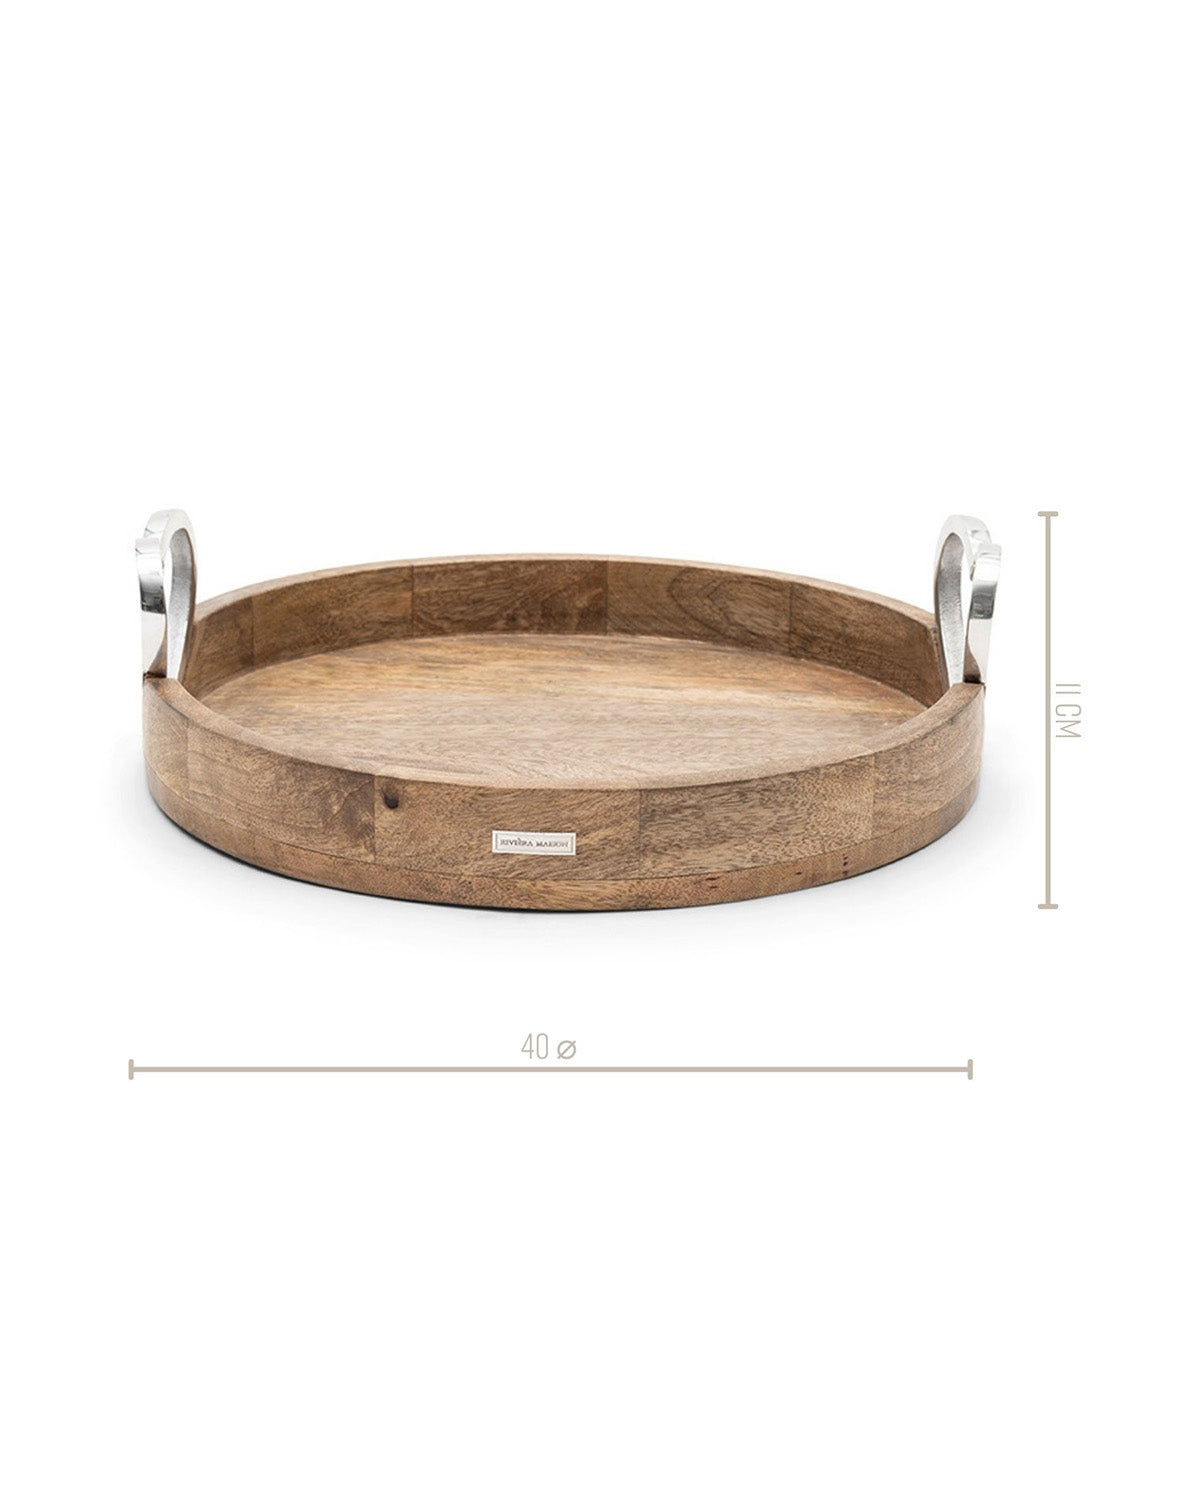 SERVING TRAY round made of mango wood heart-shaped handles made of glossy aluminum by Riviera Maison